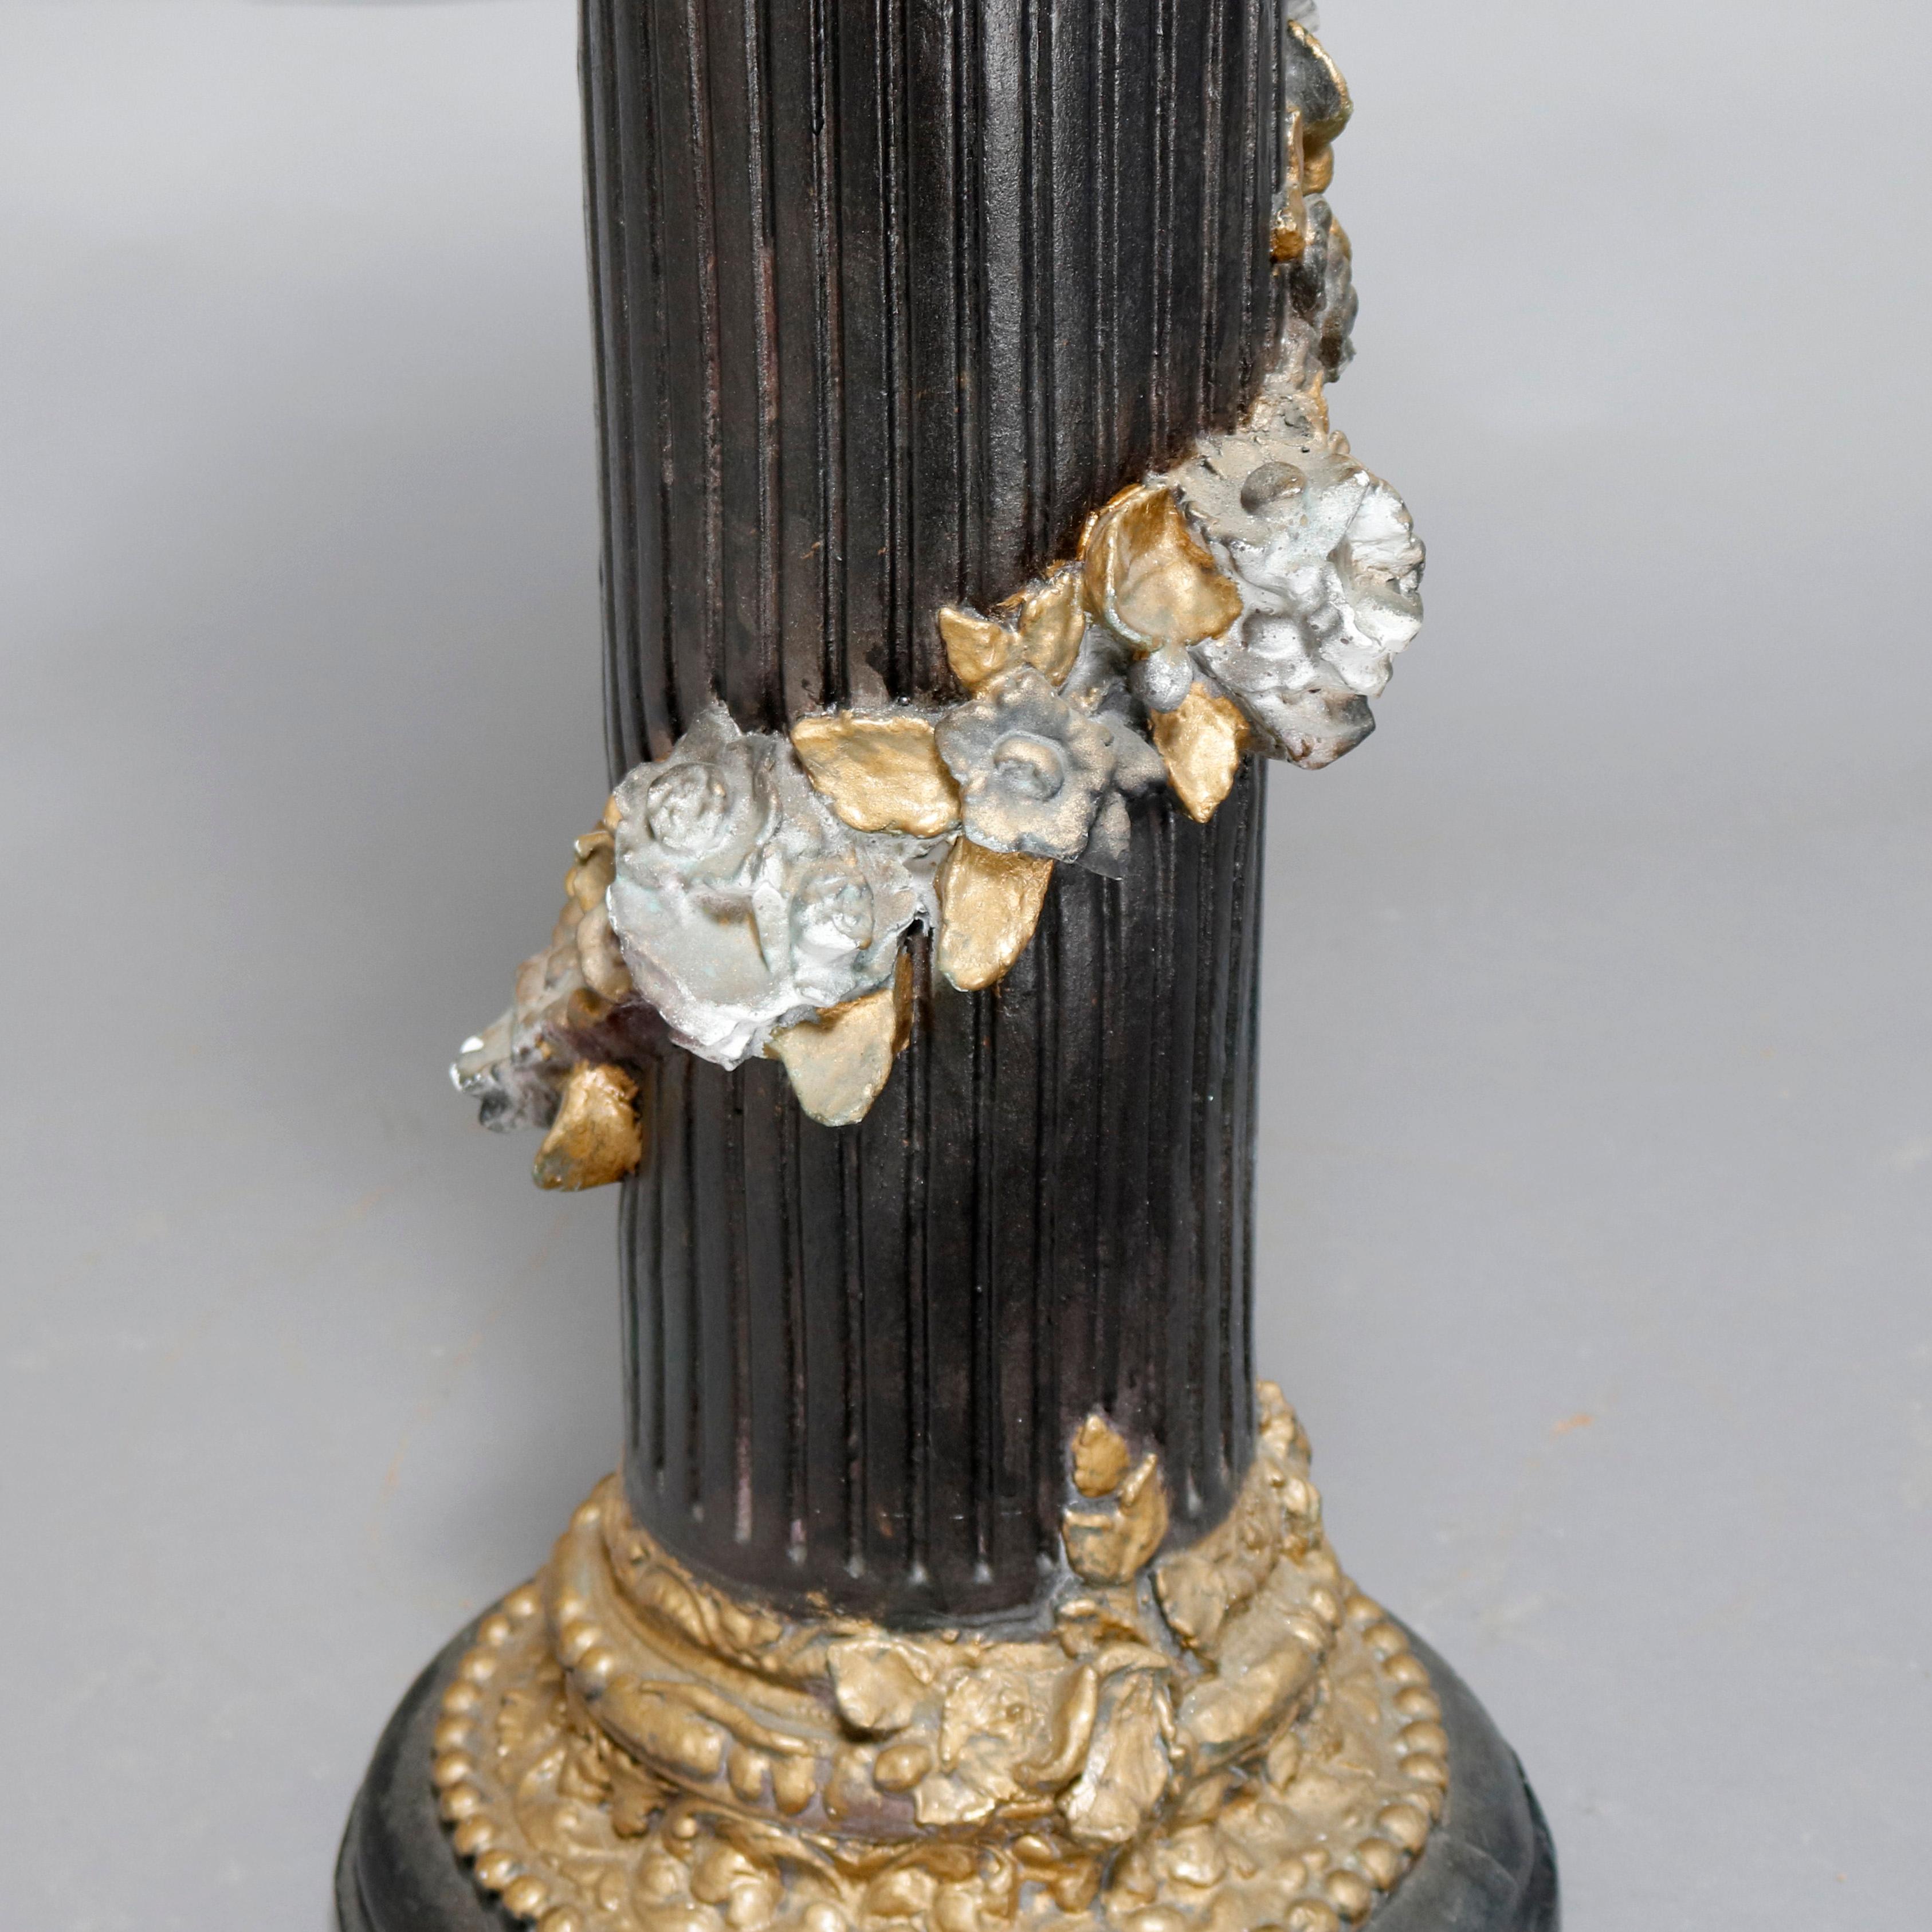 A vintage paint decorated neoclassical style plaster sculpture pedestal offers Corinthian column-form with floral garland wrapped in high relief, painted black, silver and gold, 20th century

***DELIVERY NOTICE – Due to COVID-19 we are employing